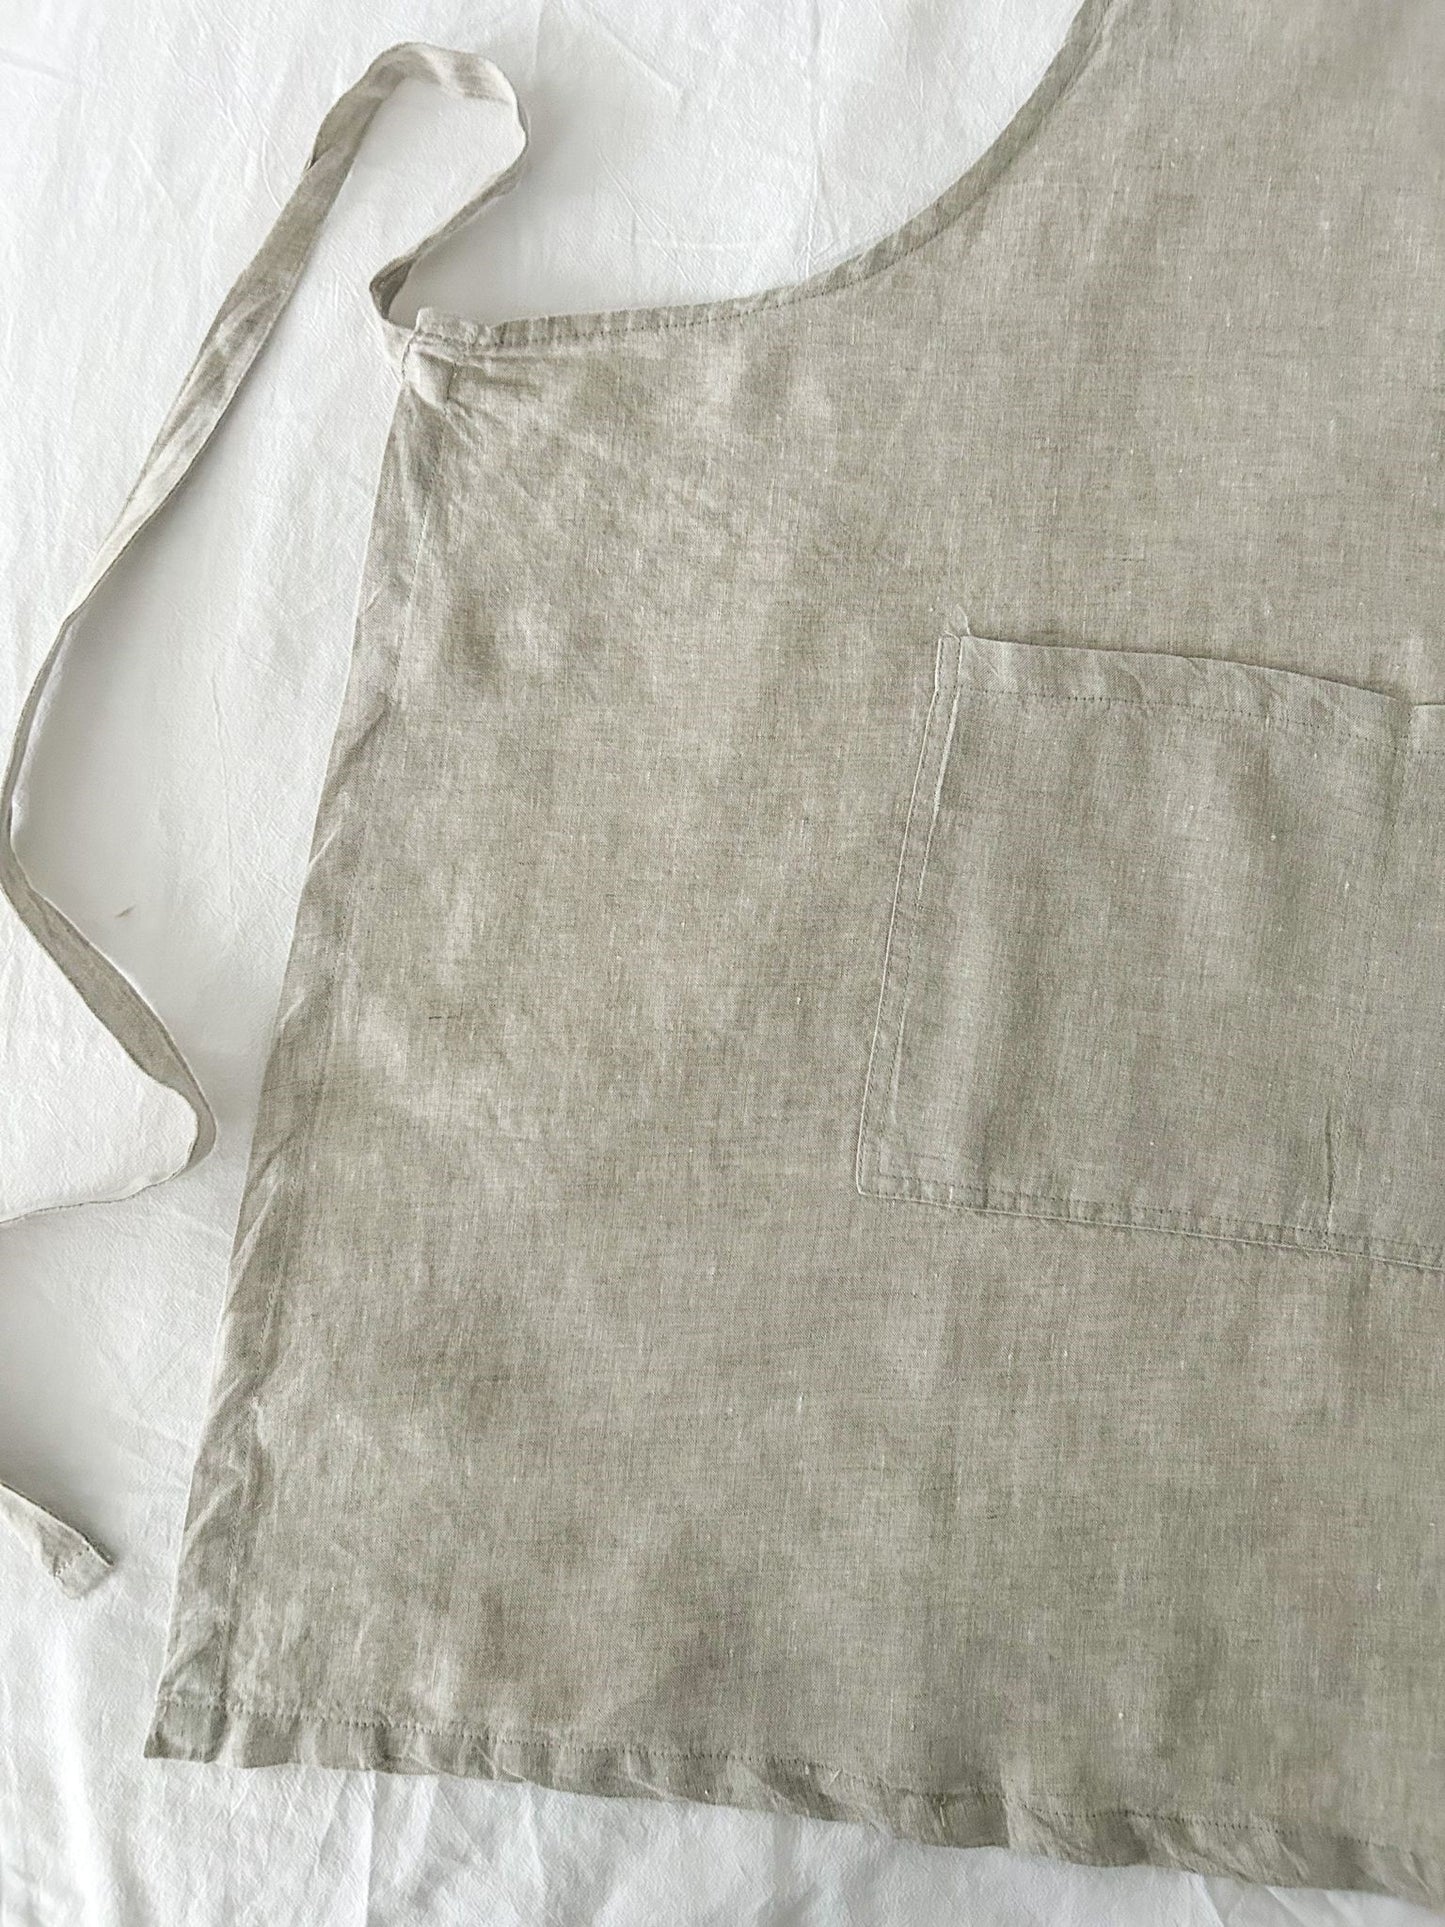 Pure French Linen Apron - Natural